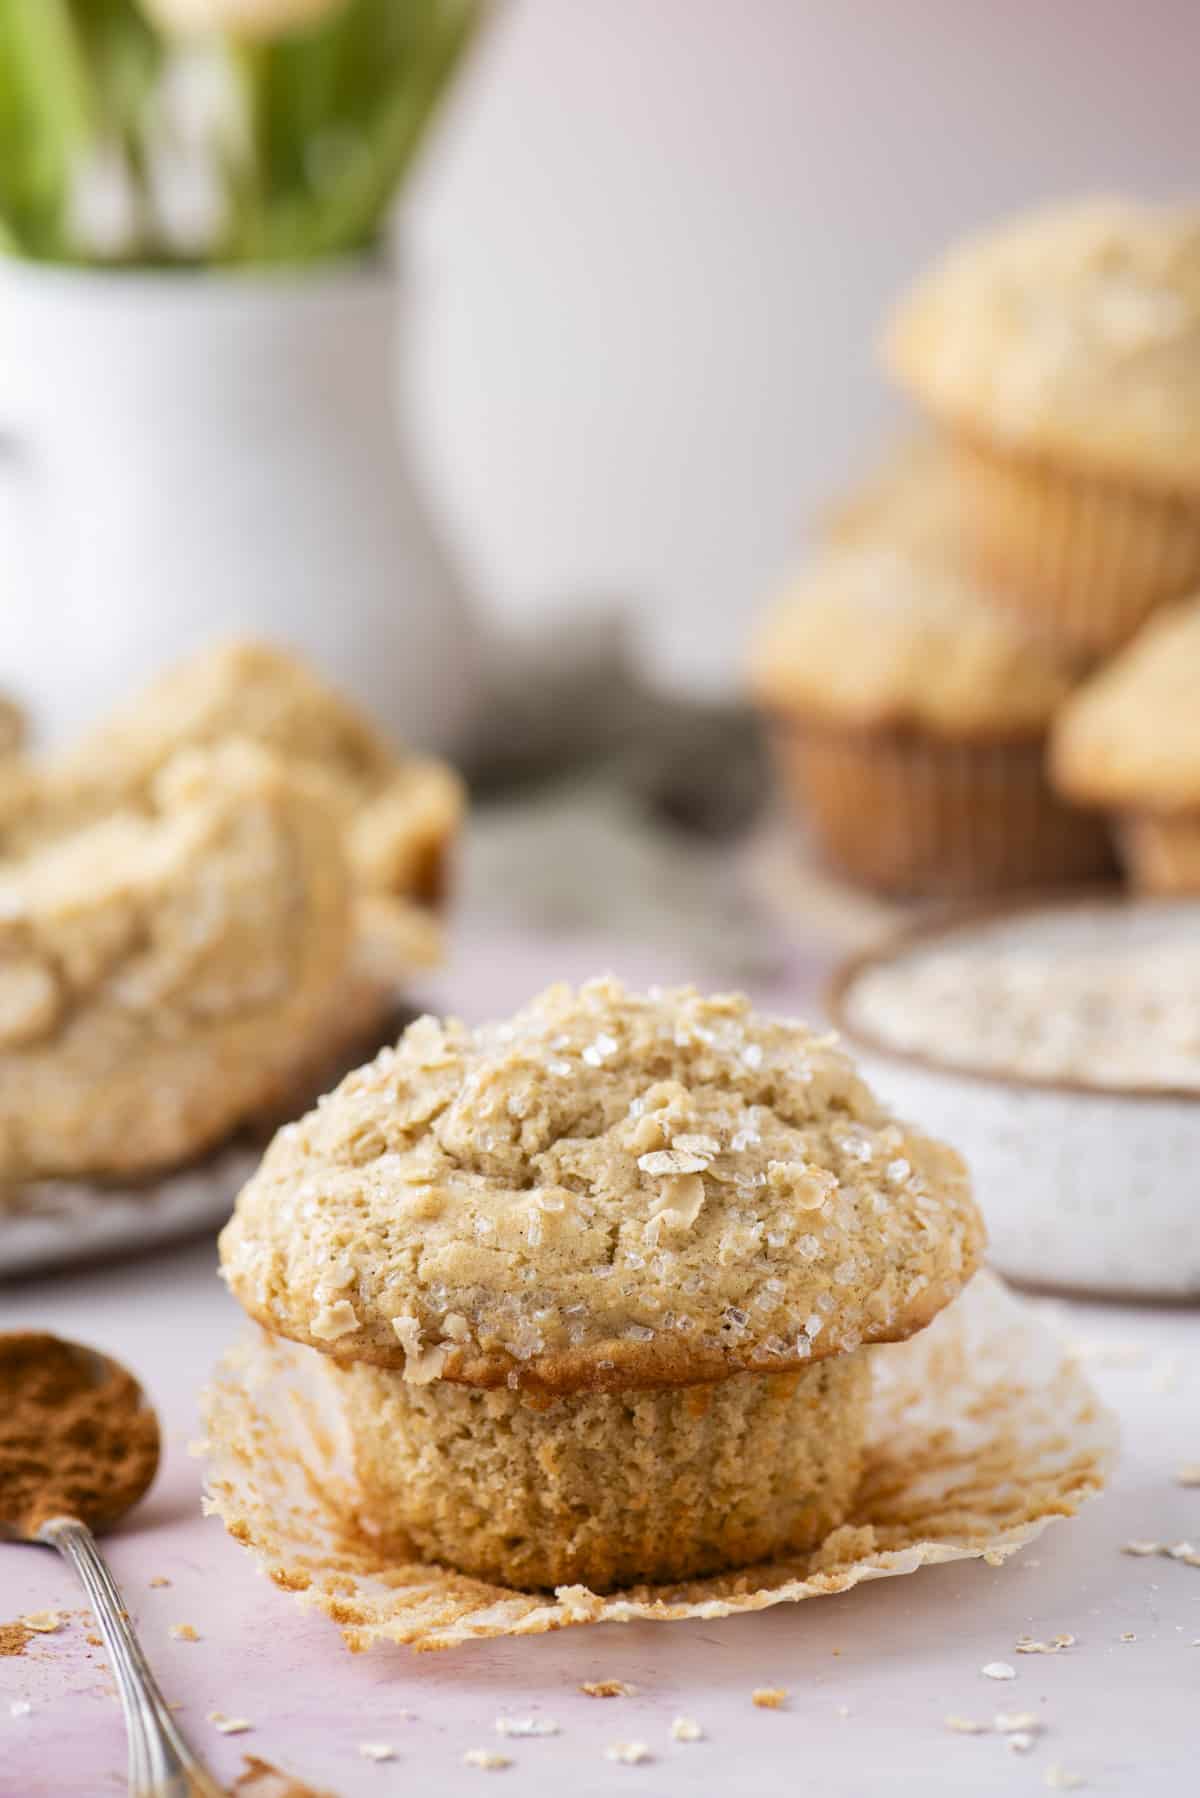 an oatmeal muffin sitting on top of its muffin liner that has been peeled away from the sides, with a spoon of cinnamon beside it, more muffins in the background and oats sprinkled around